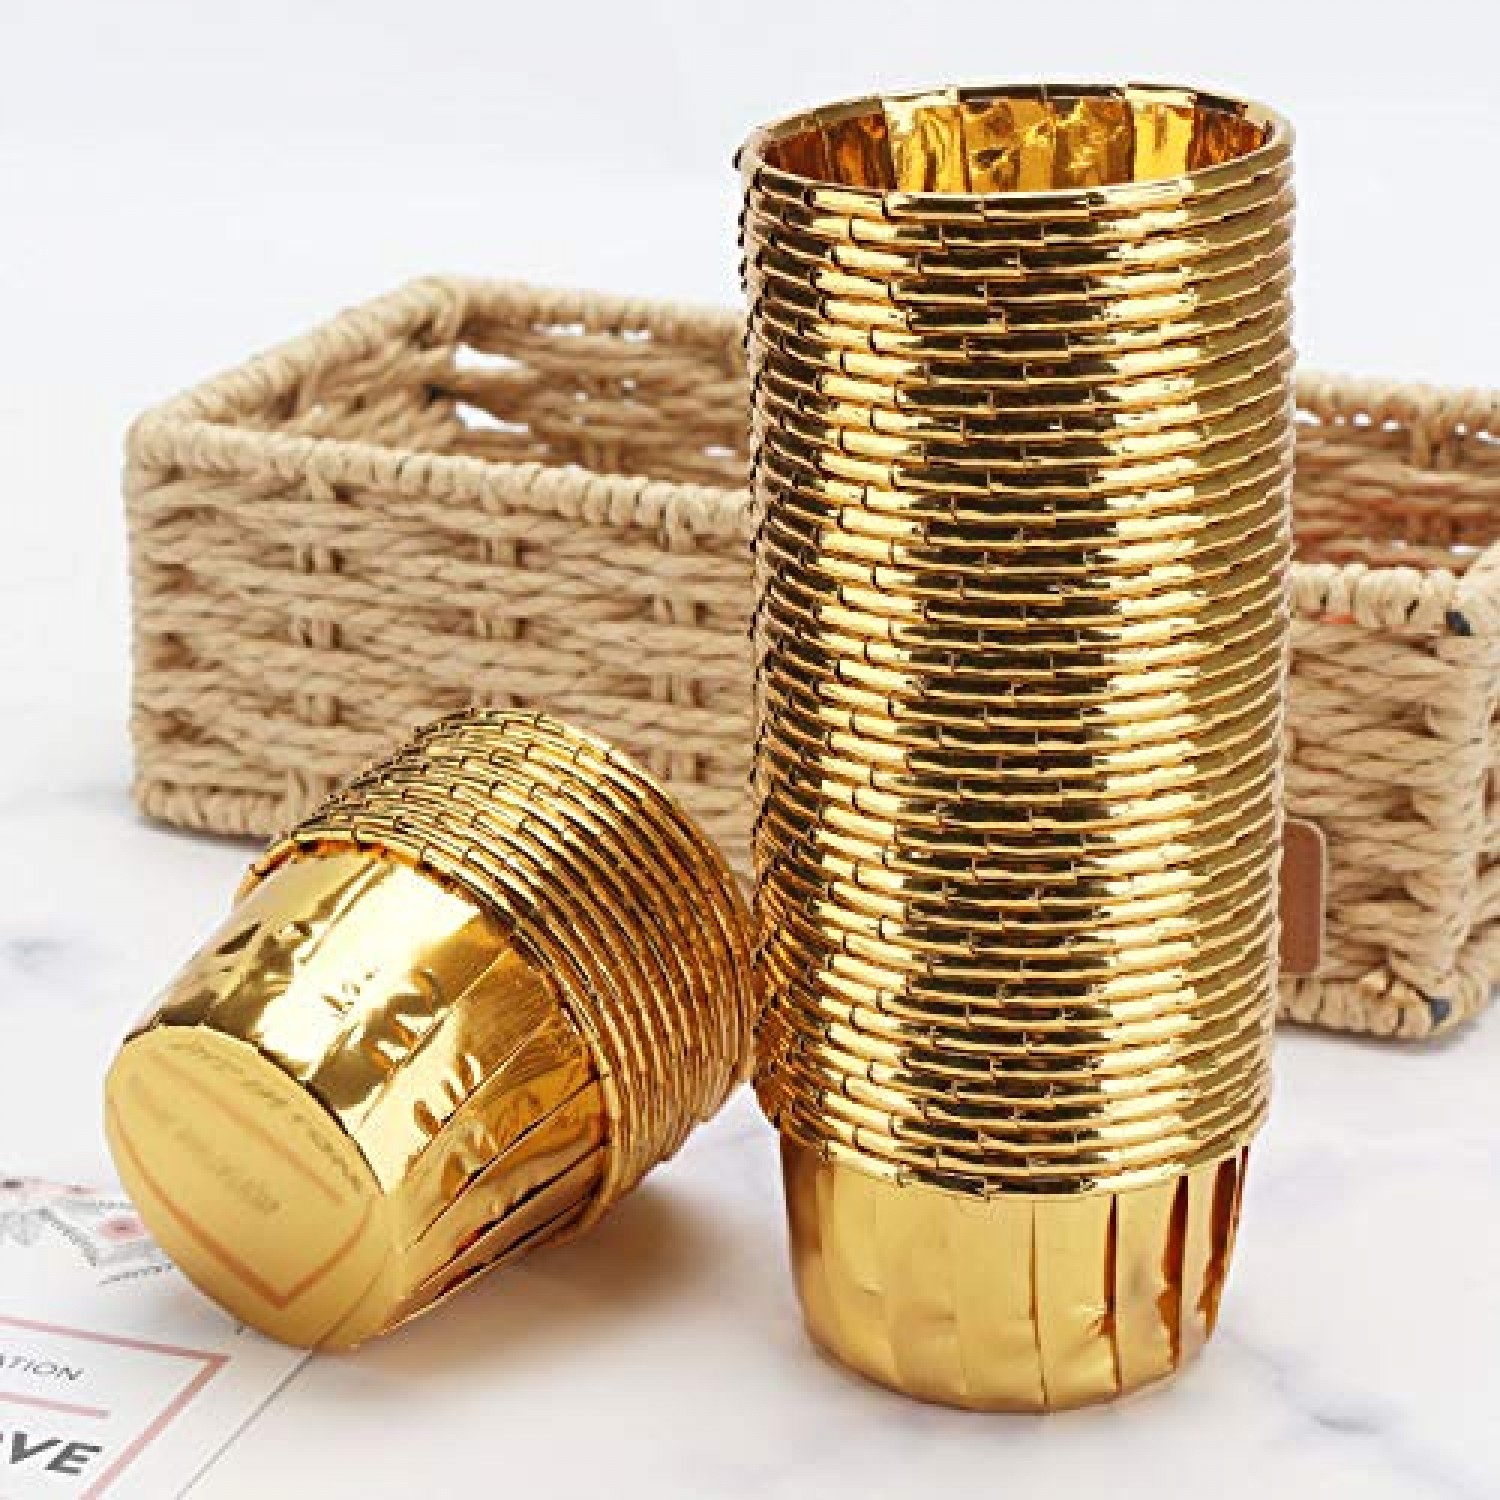 1000 Mini Foil Gold Baking Cups Cupcake Muffin Liners Bake Pastry Party Samplers